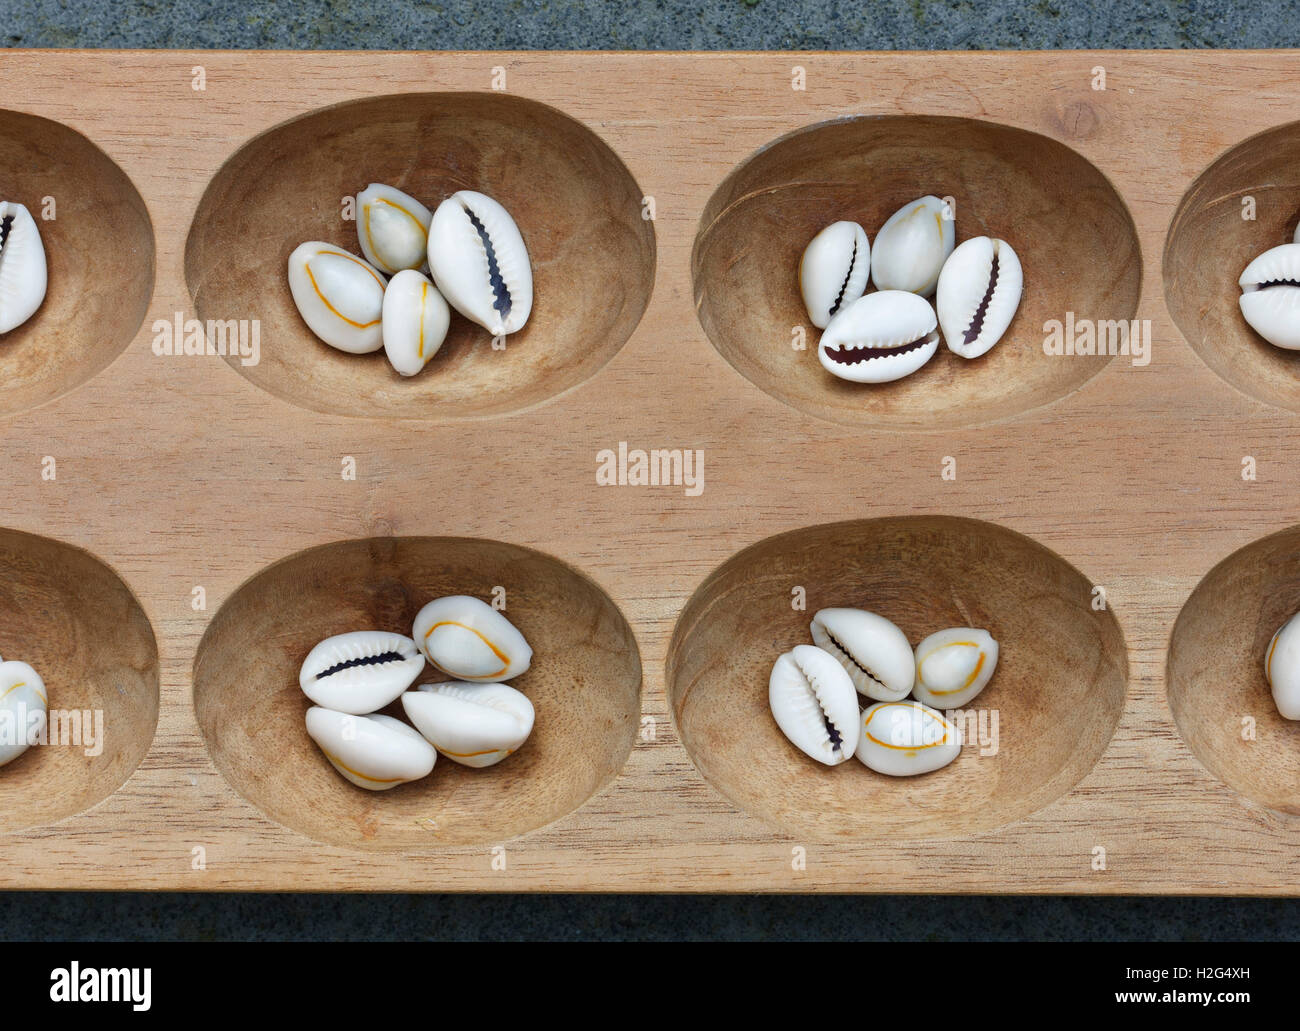 Detail of a mancala board with shells. Mancala is a traditional board game played around the world. Stock Photo